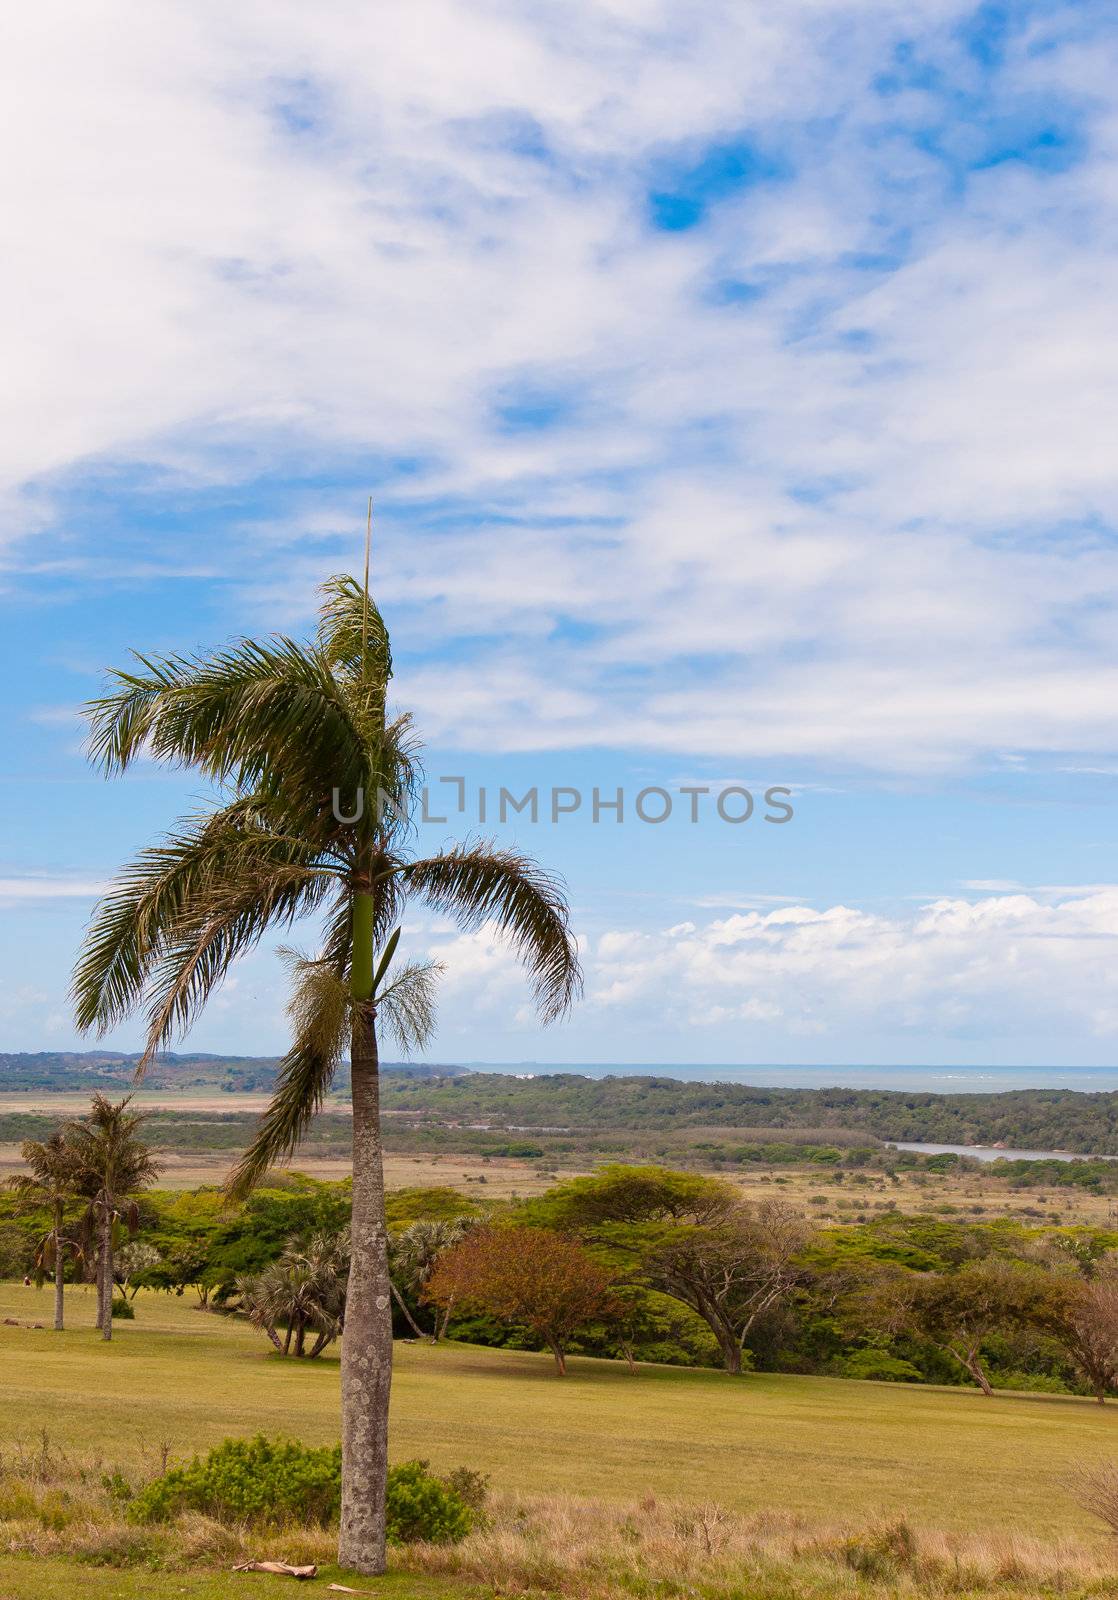 Ocean view with palm tree in Mtunzini, South Africa